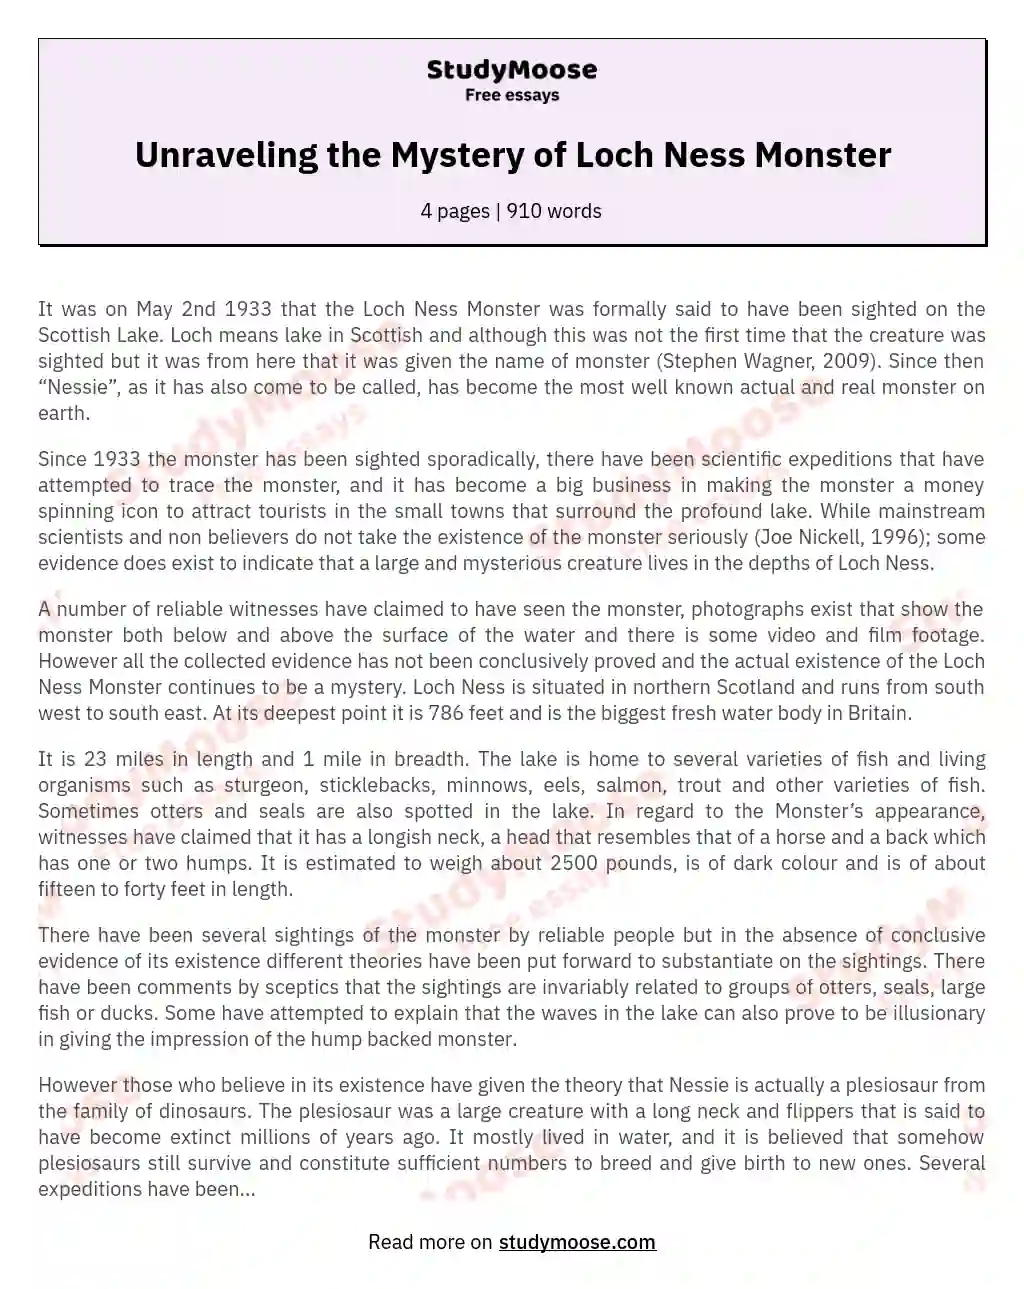 Unraveling the Mystery of Loch Ness Monster essay